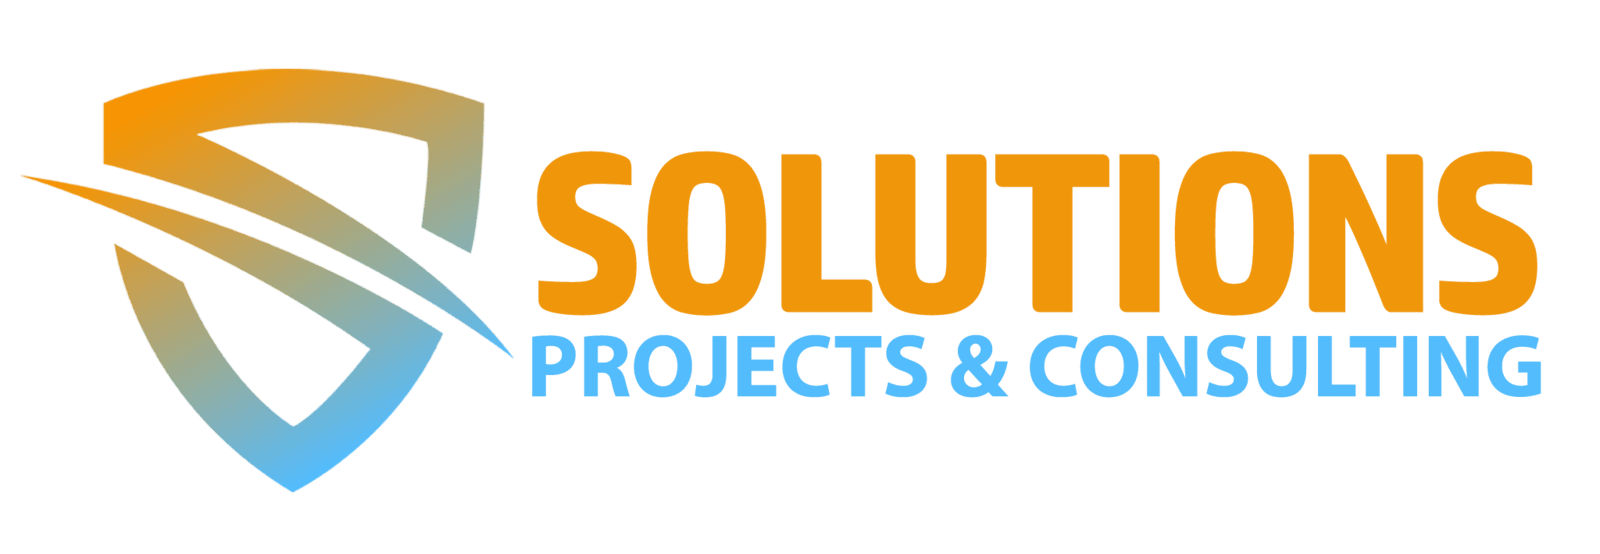 SOLUTIONS PROJECTS & CONSULTING